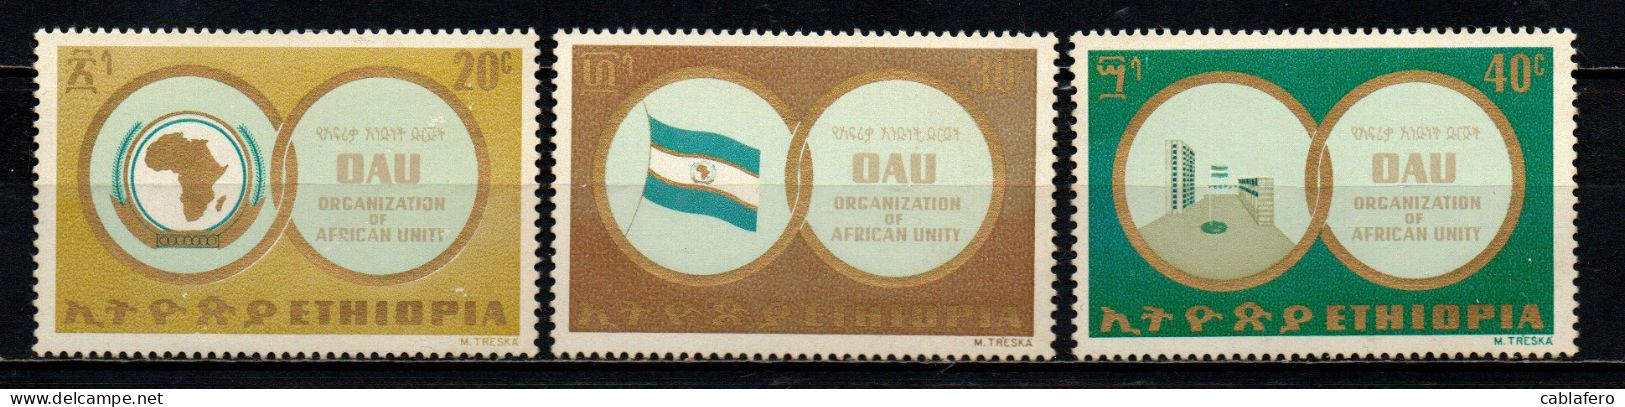 ETIOPIA - 1970 - Africa Unity Day And Organization Of African Unity - MNH - Etiopia